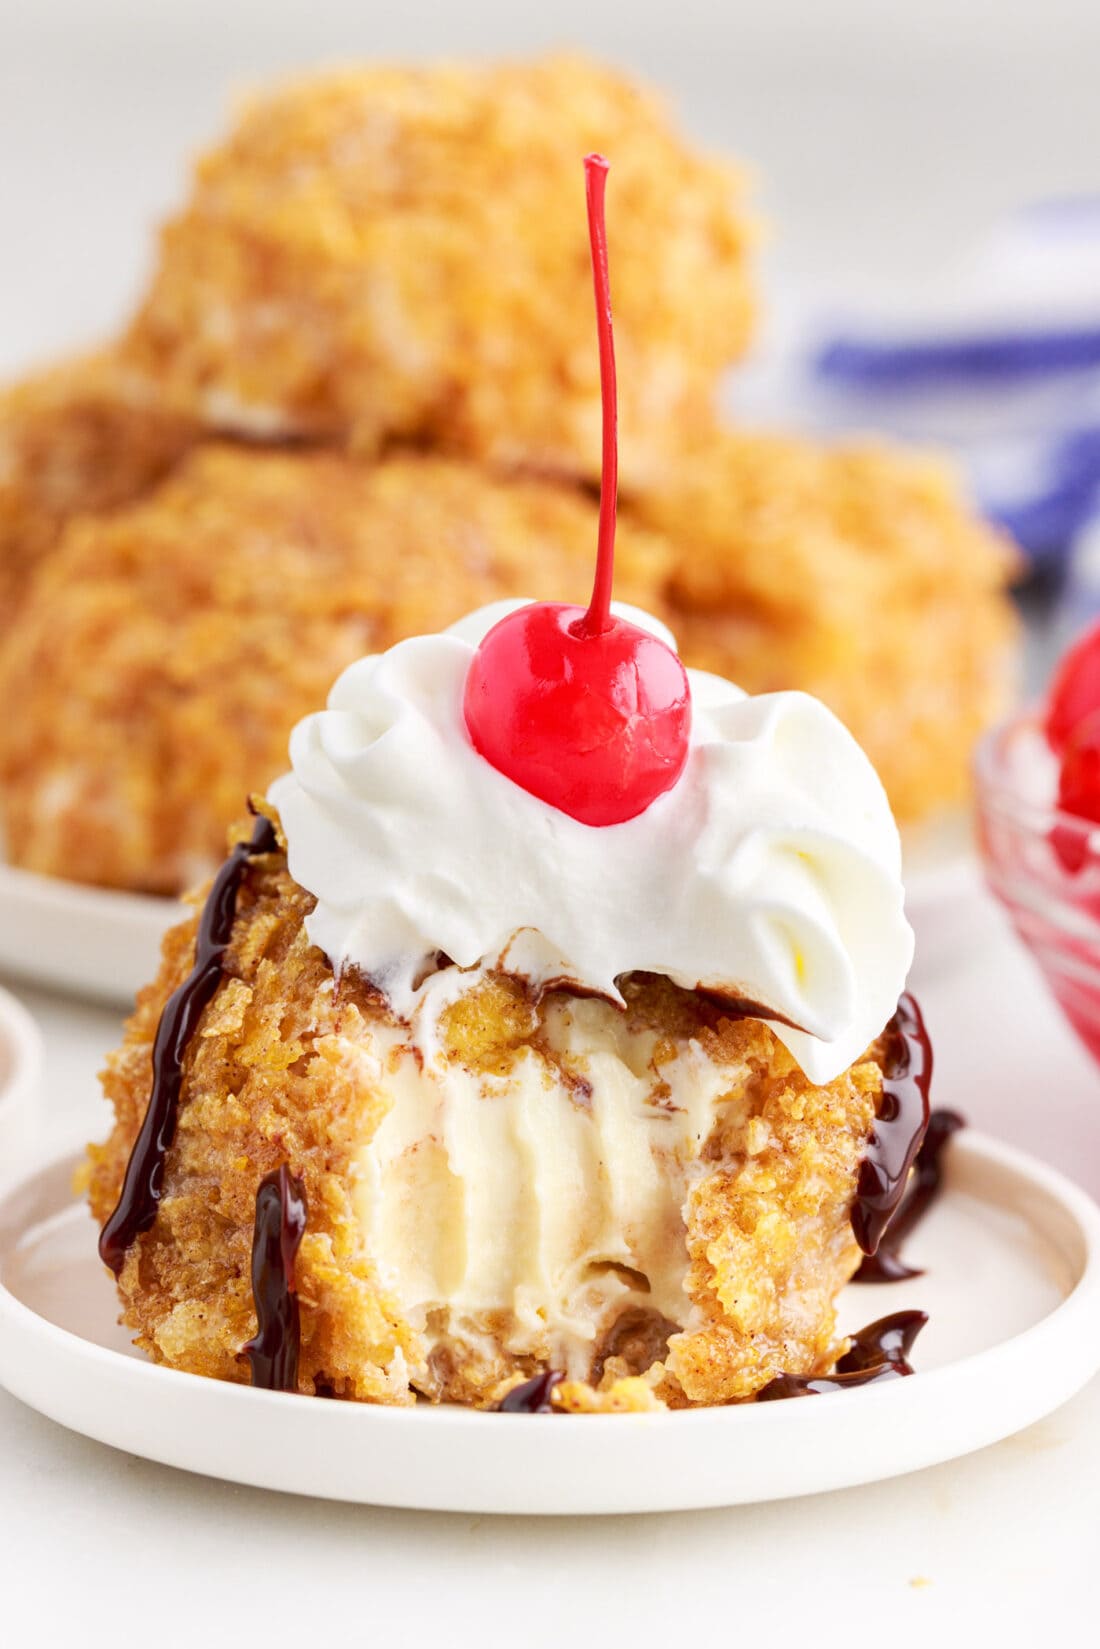 Fried Ice Cream on a plate with a bite taken out